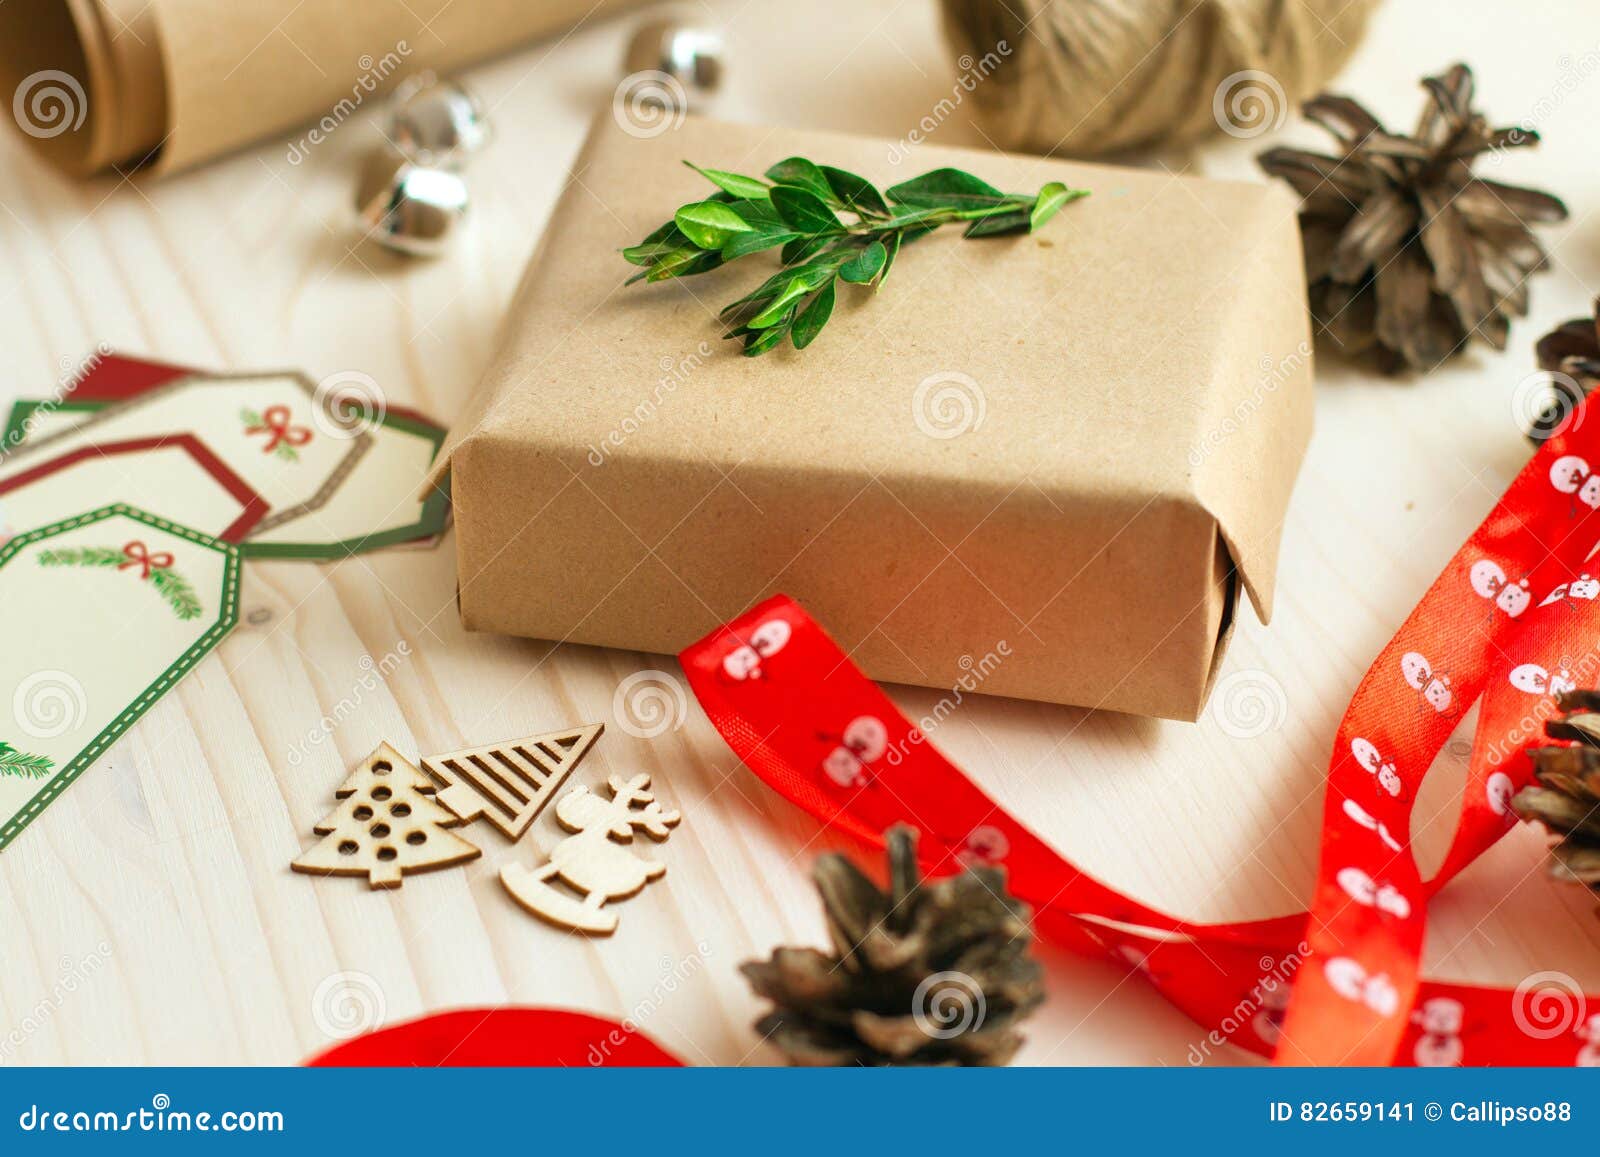 Wrapping Christmas gifts stock image. Image of vintage - 82659141